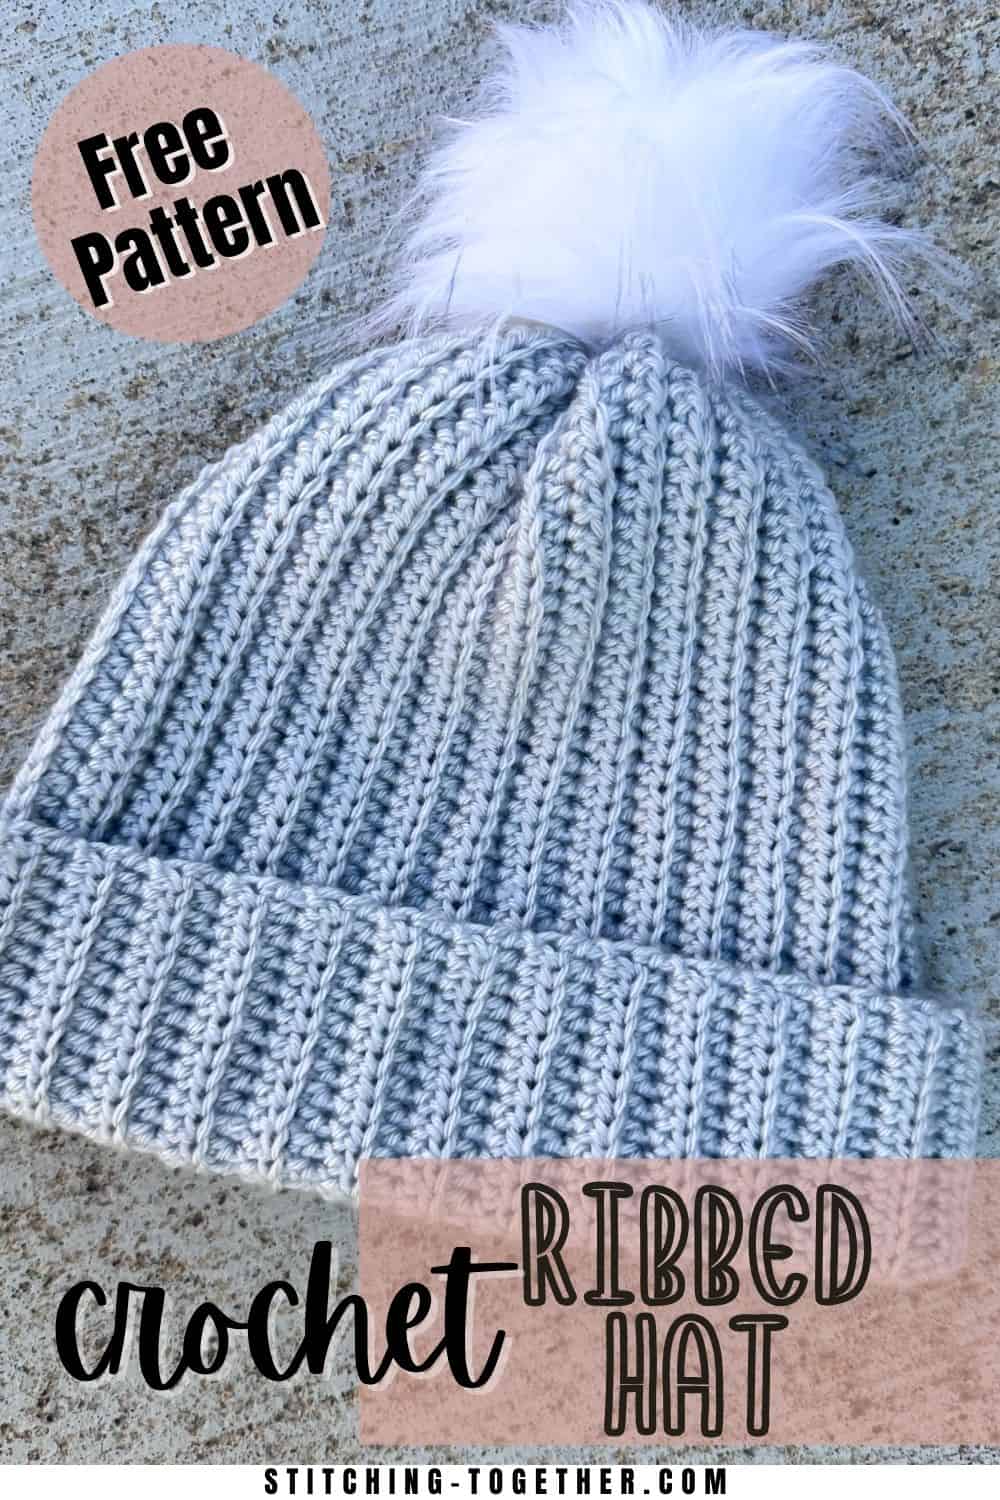 crochet ribbed beanie with text overlay reading "free pattern, crochet ribbed hat"